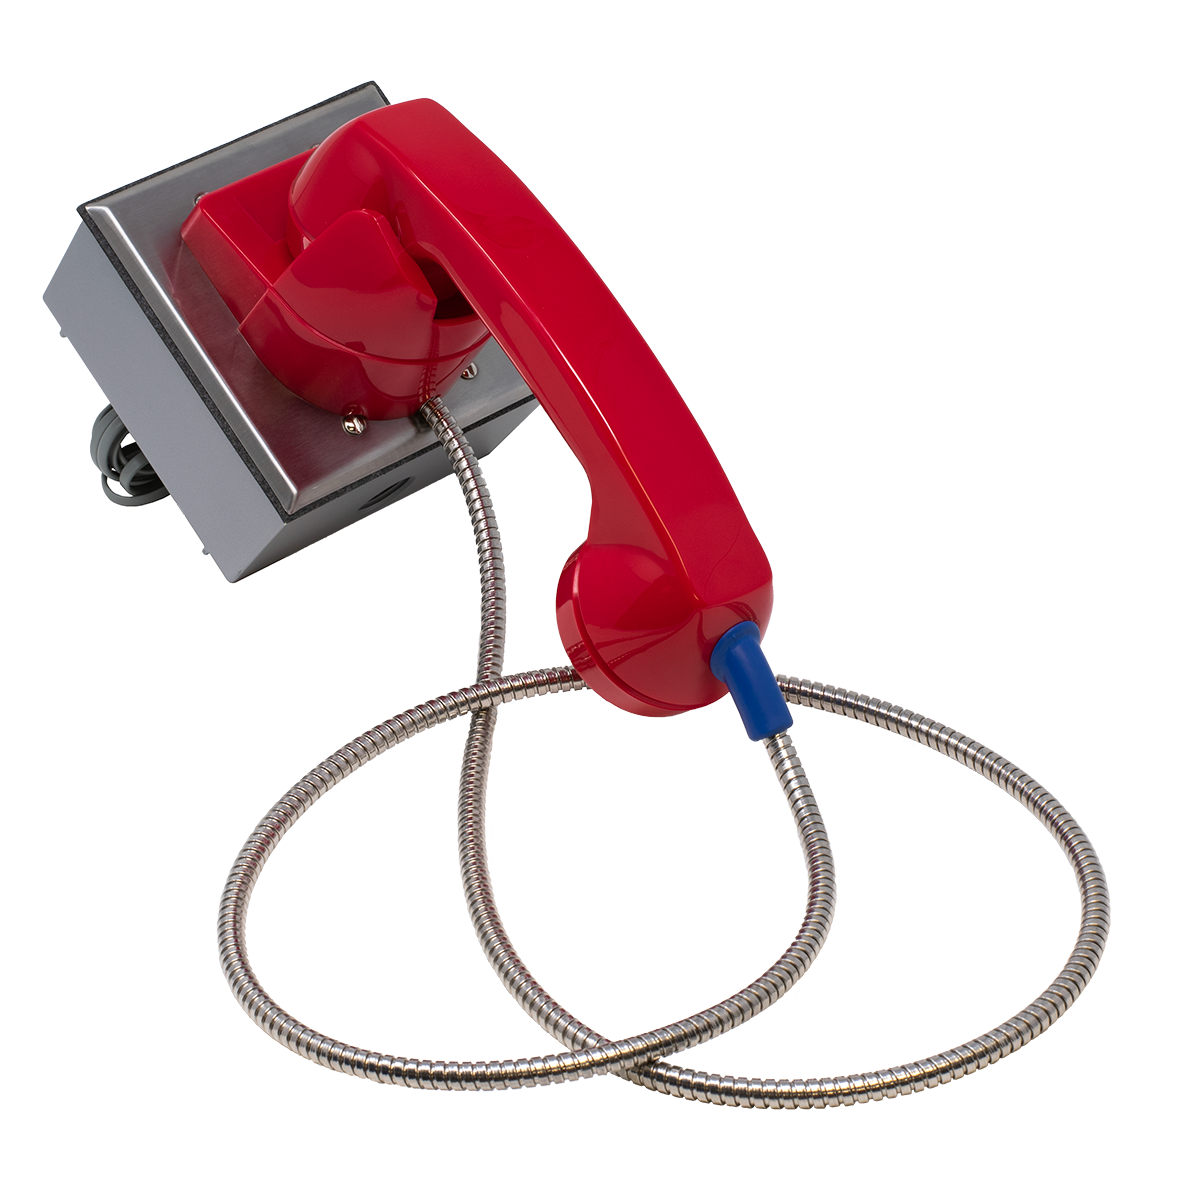 Outdoor Rated Telephone with Red Plastic Hookswitch (Side View)